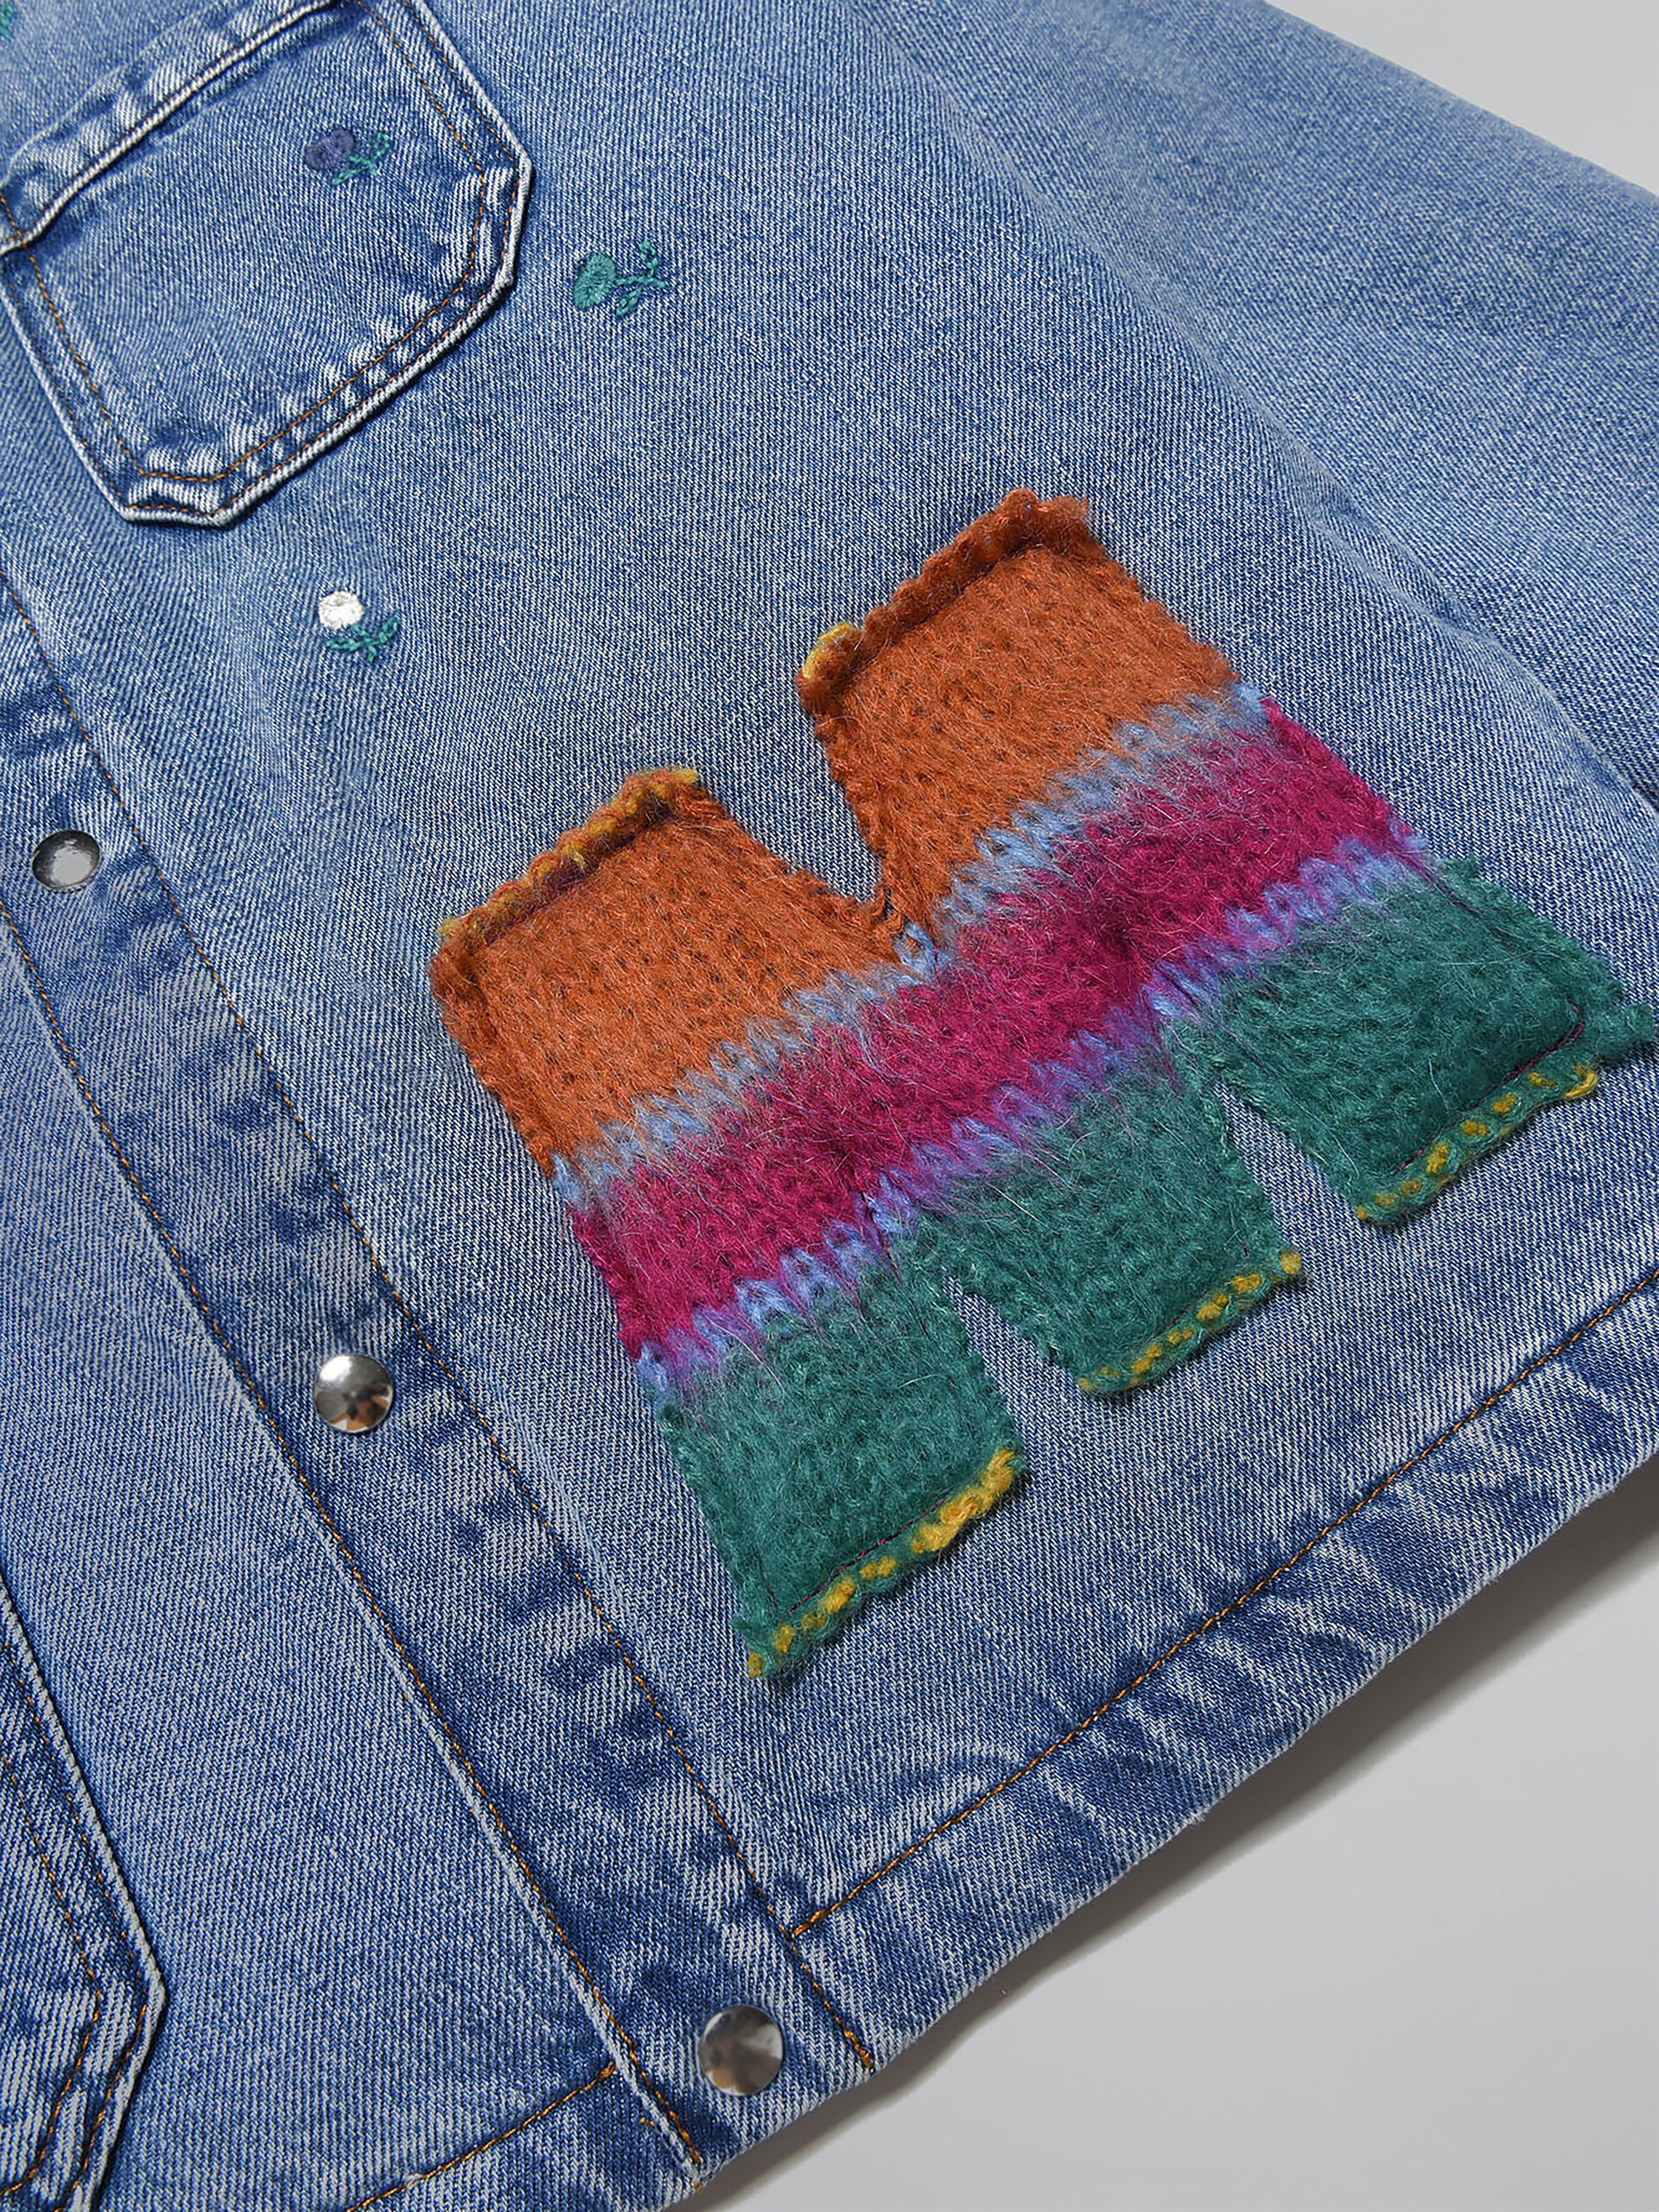 Light denim jacket with floral embroidery and patches - Jackets - Image 4